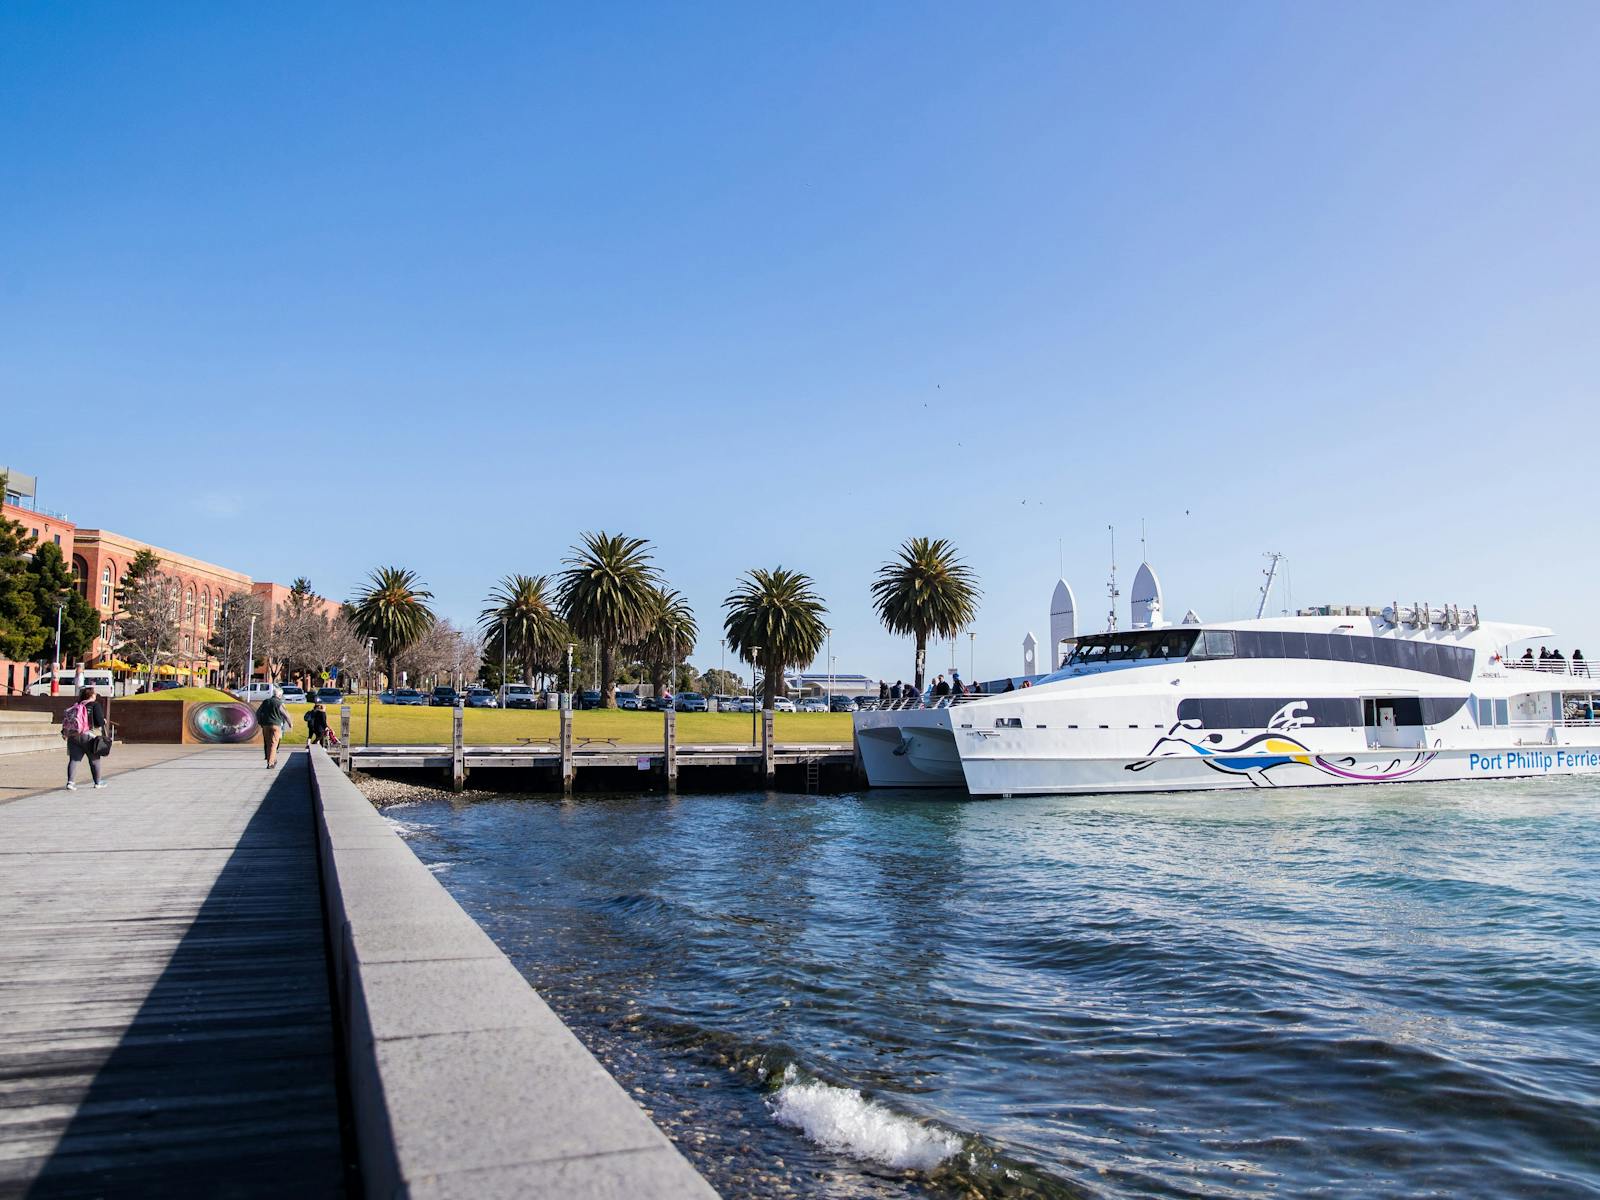 Port Phillip Ferries docked right on Geelong's Waterfront